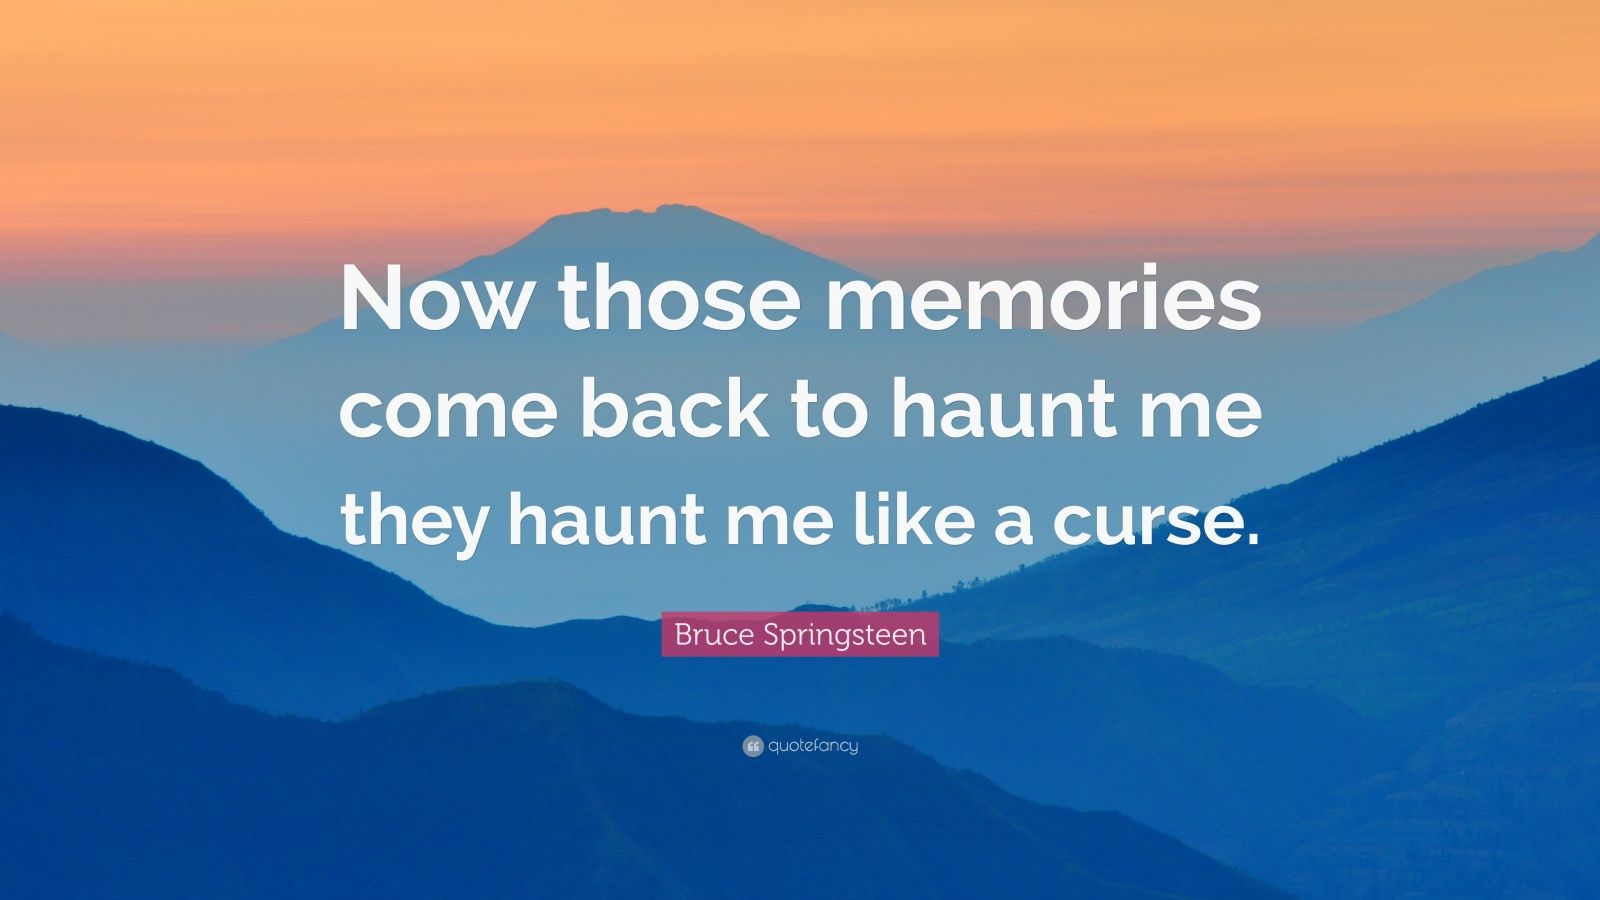 Bruce Springsteen Quote “Now those memories come back to haunt me they